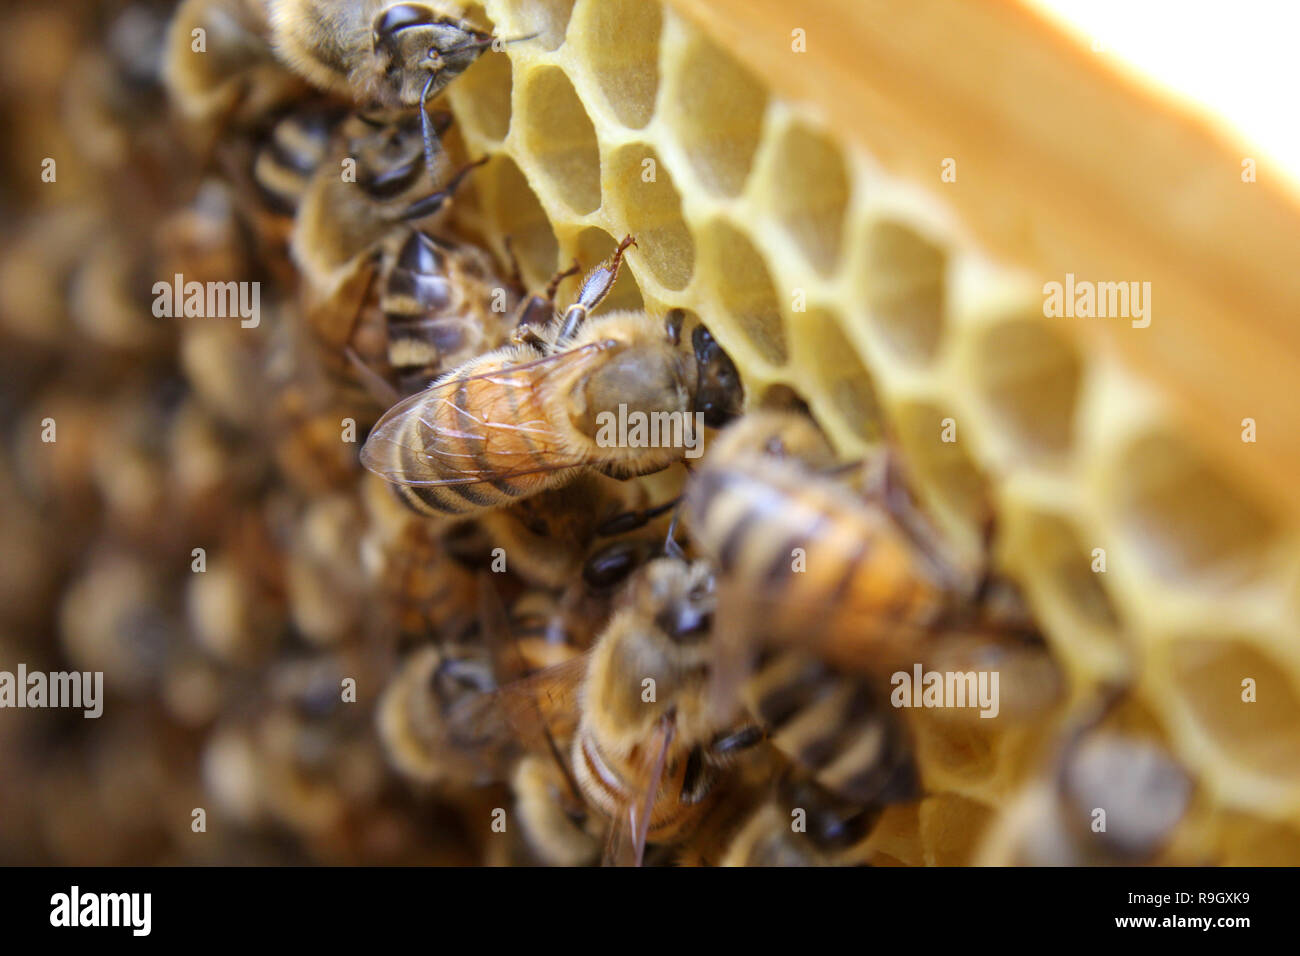 Honey bees working on a honeycomb hexagonal structure in the beehive Stock Photo